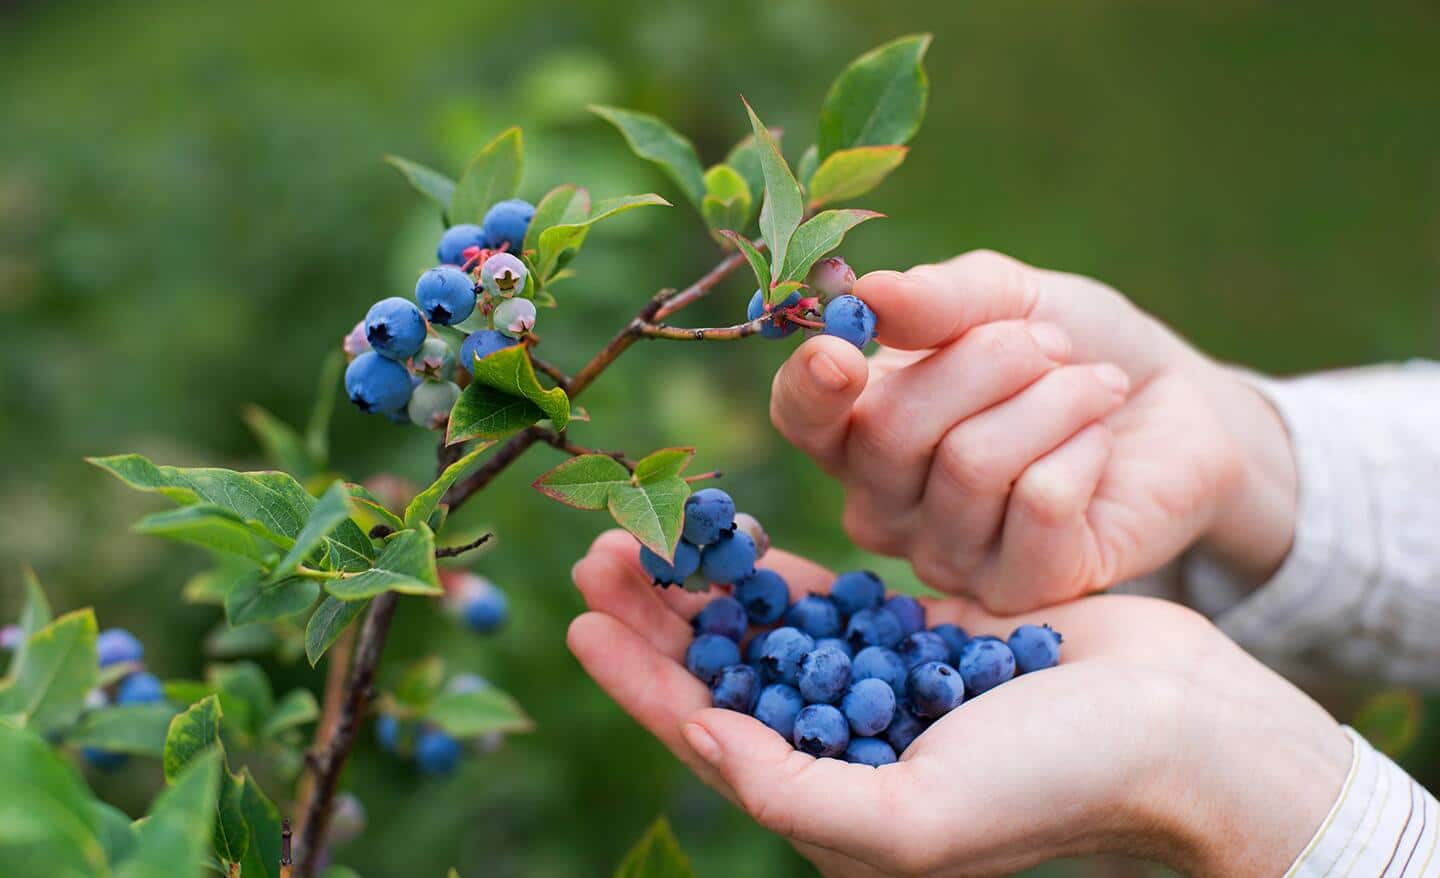 Gardener holds a handful of ripe blueberries while picking fresh blueberries from a bush